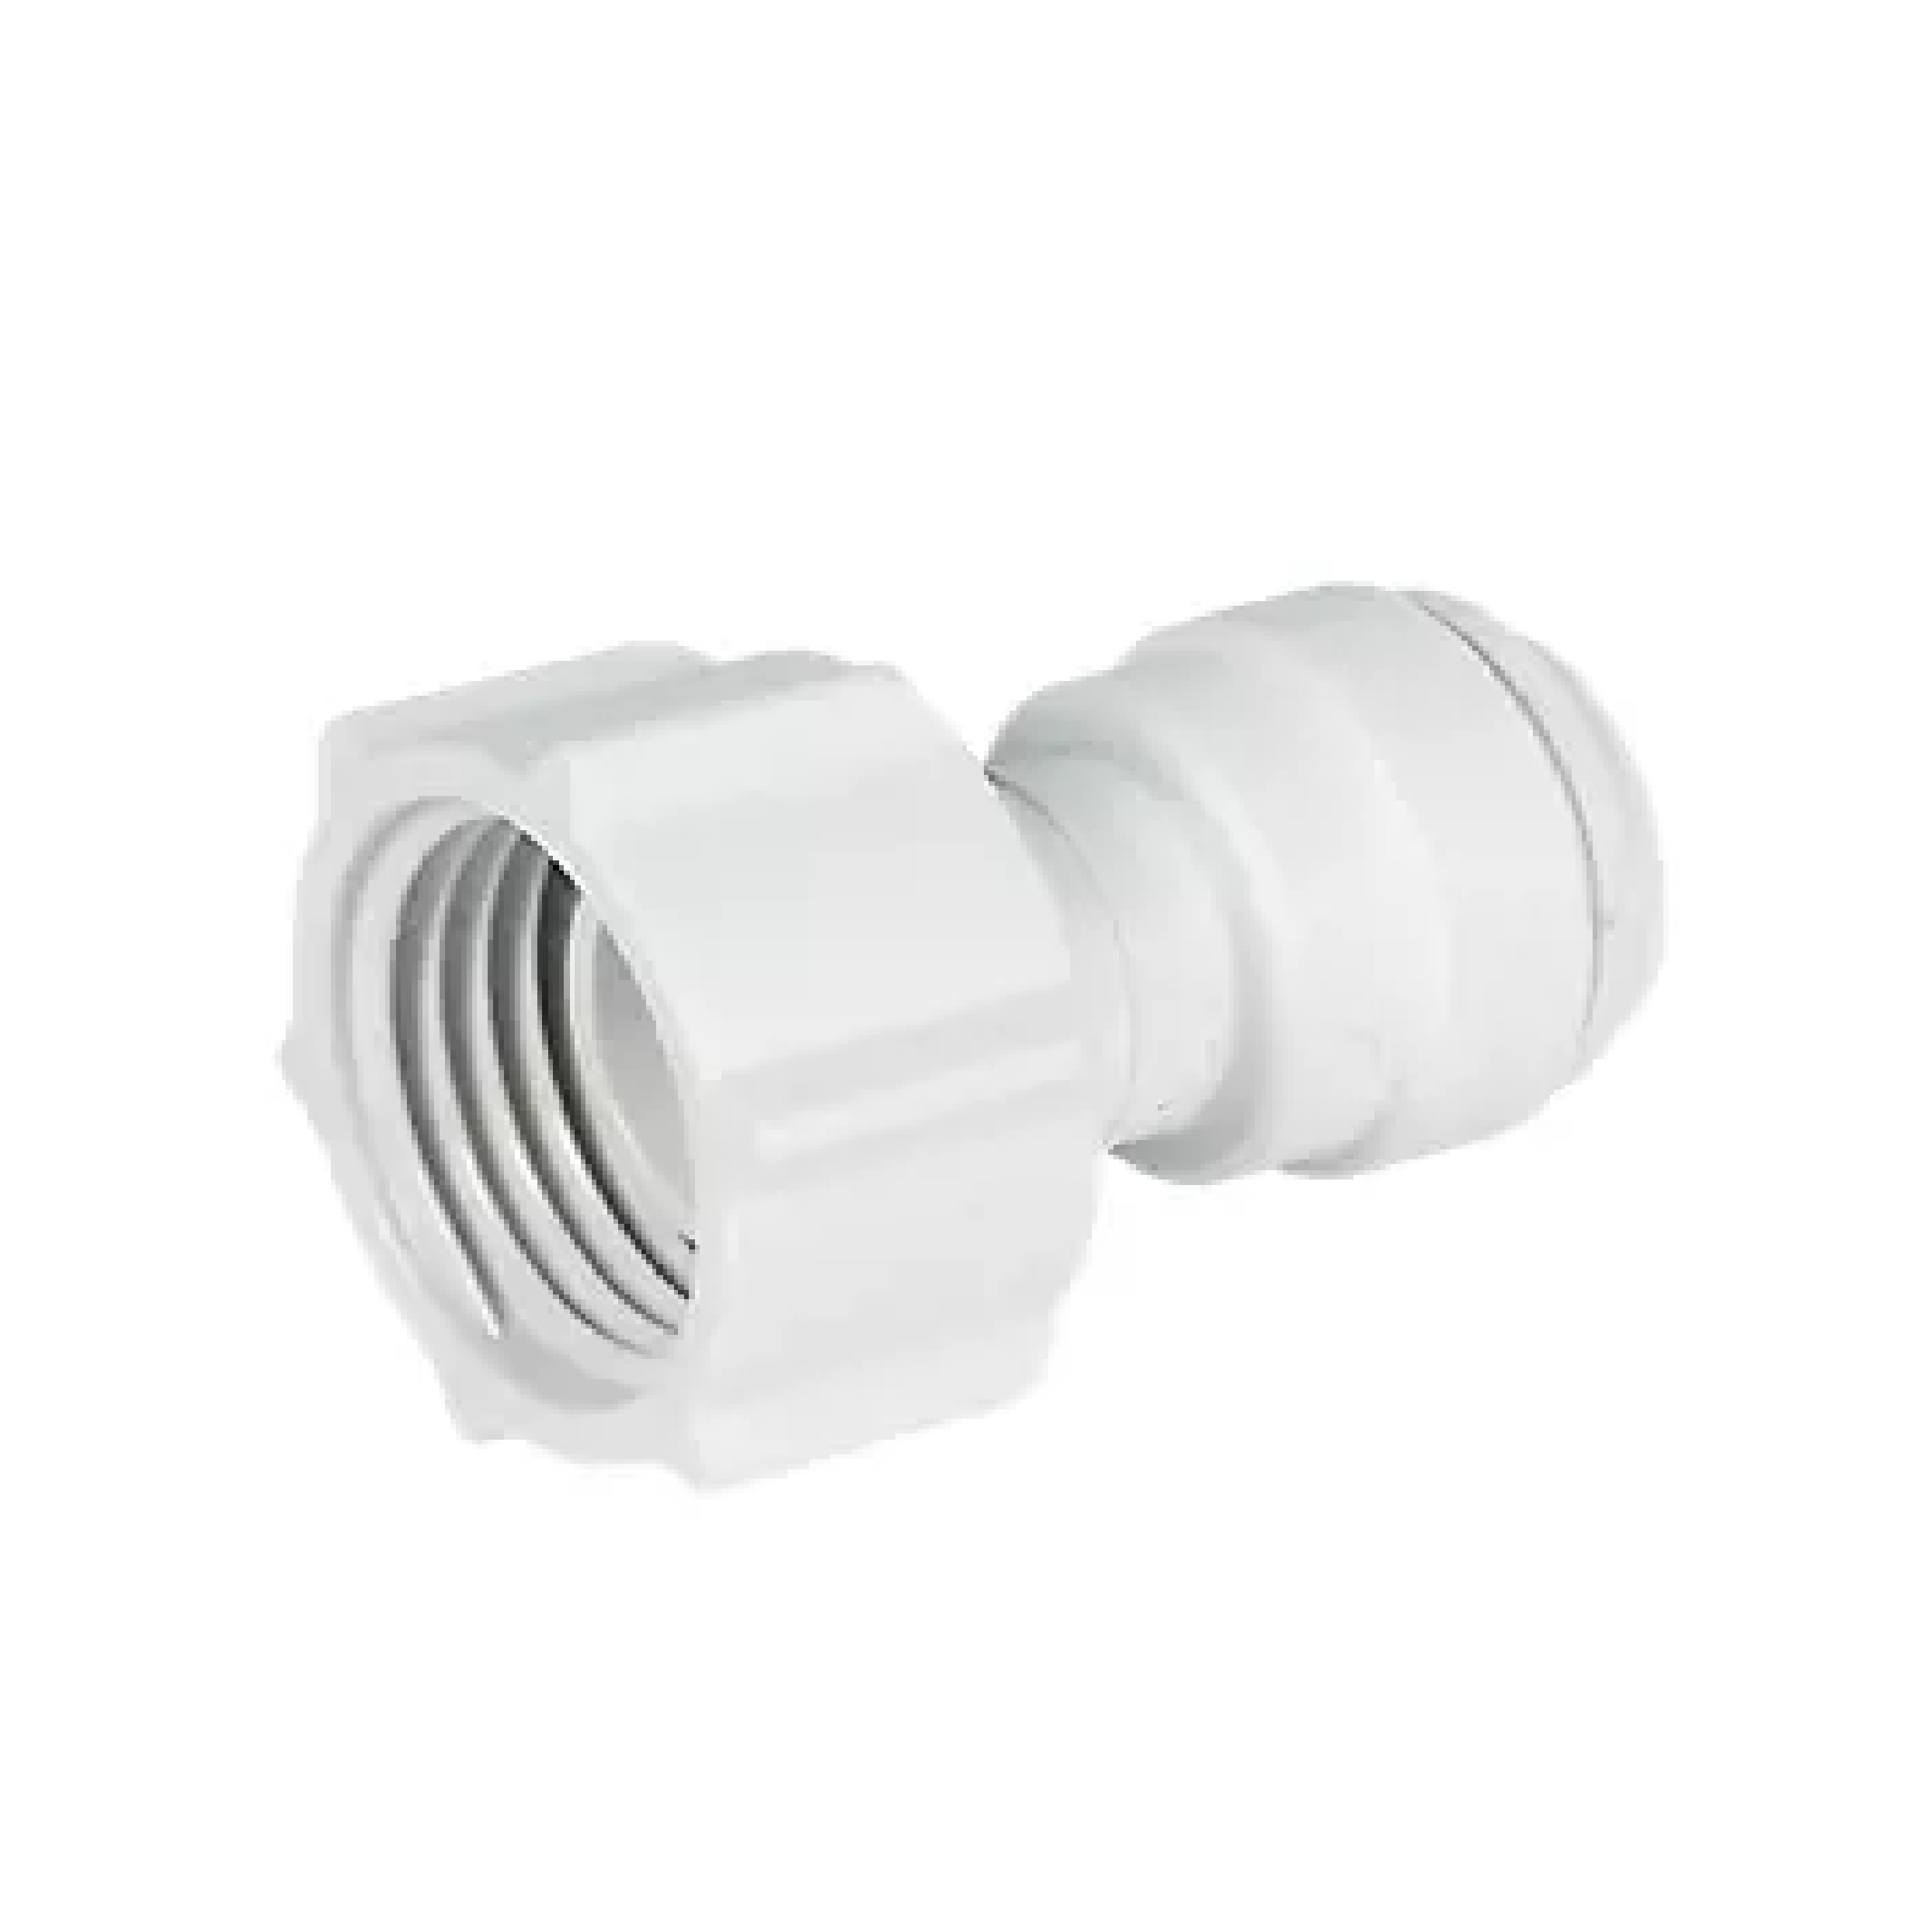 TPC WATER FILTER Female Thread Connector 1/2" X 1/4" OD Push Fitting